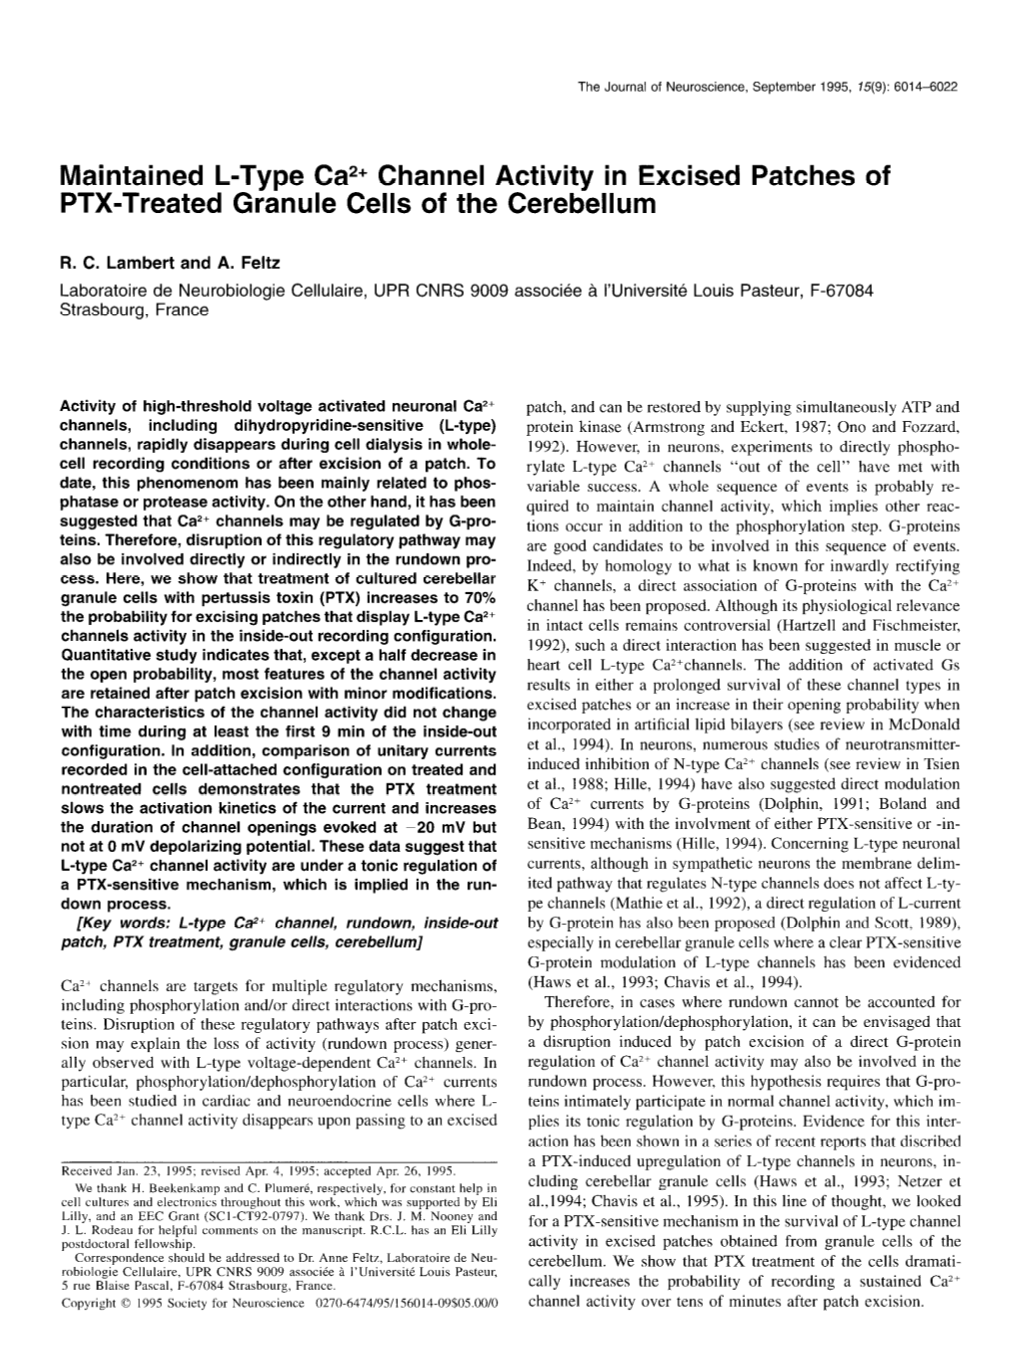 Maintained L-Type Ca*+ Channel Activity in Excised Patches of PTX-Treated Granule Cells of the Cerebellum